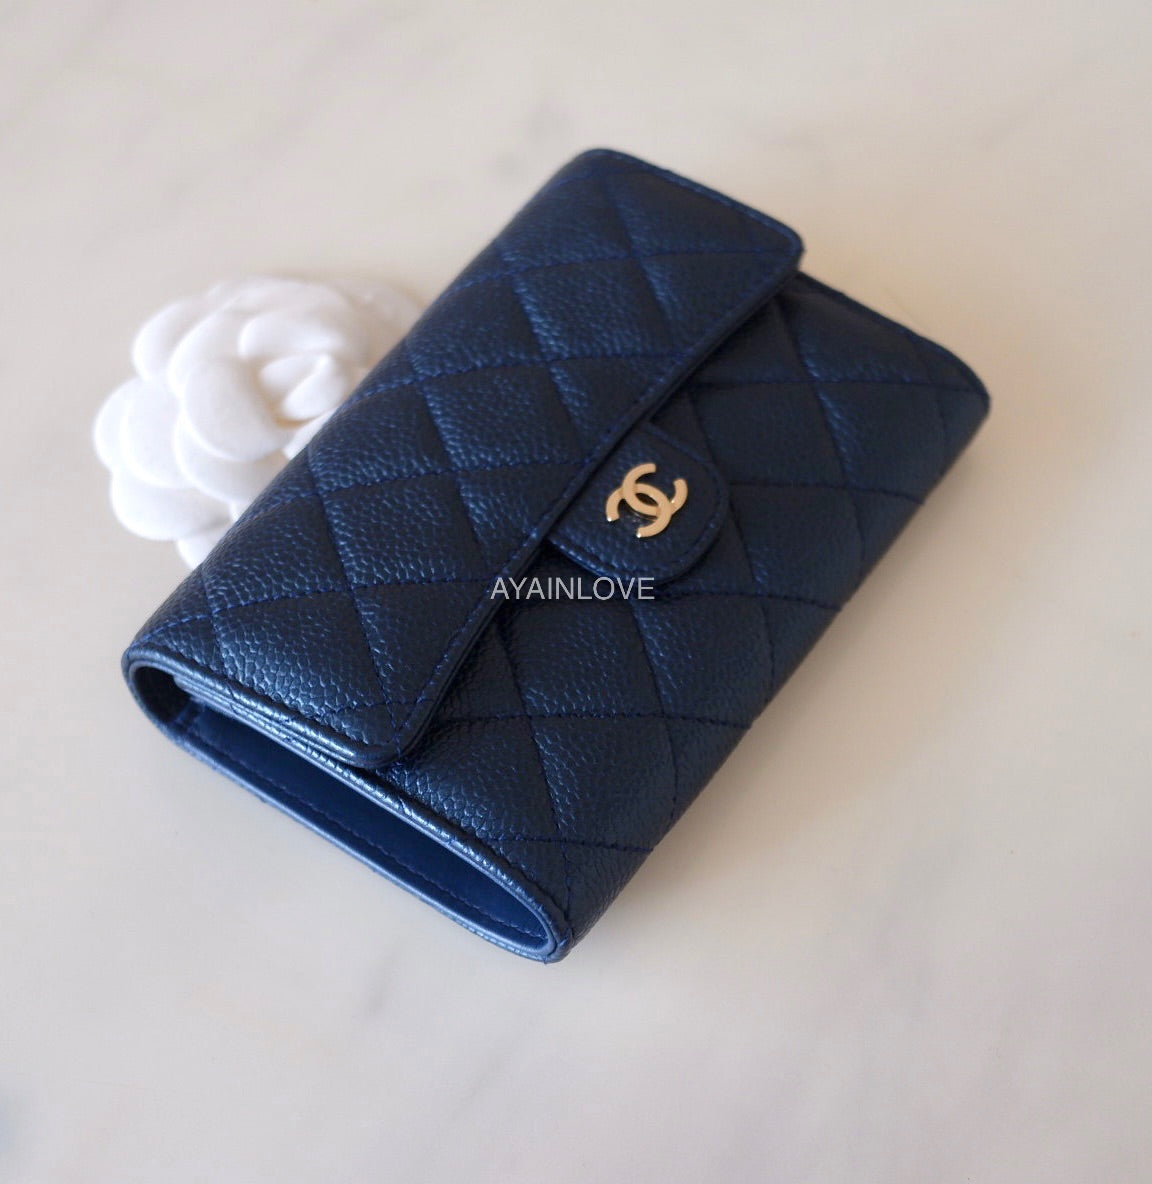 Chanel Pink Caviar Quilted Leather Trifold Flap Wallet For Sale at 1stDibs